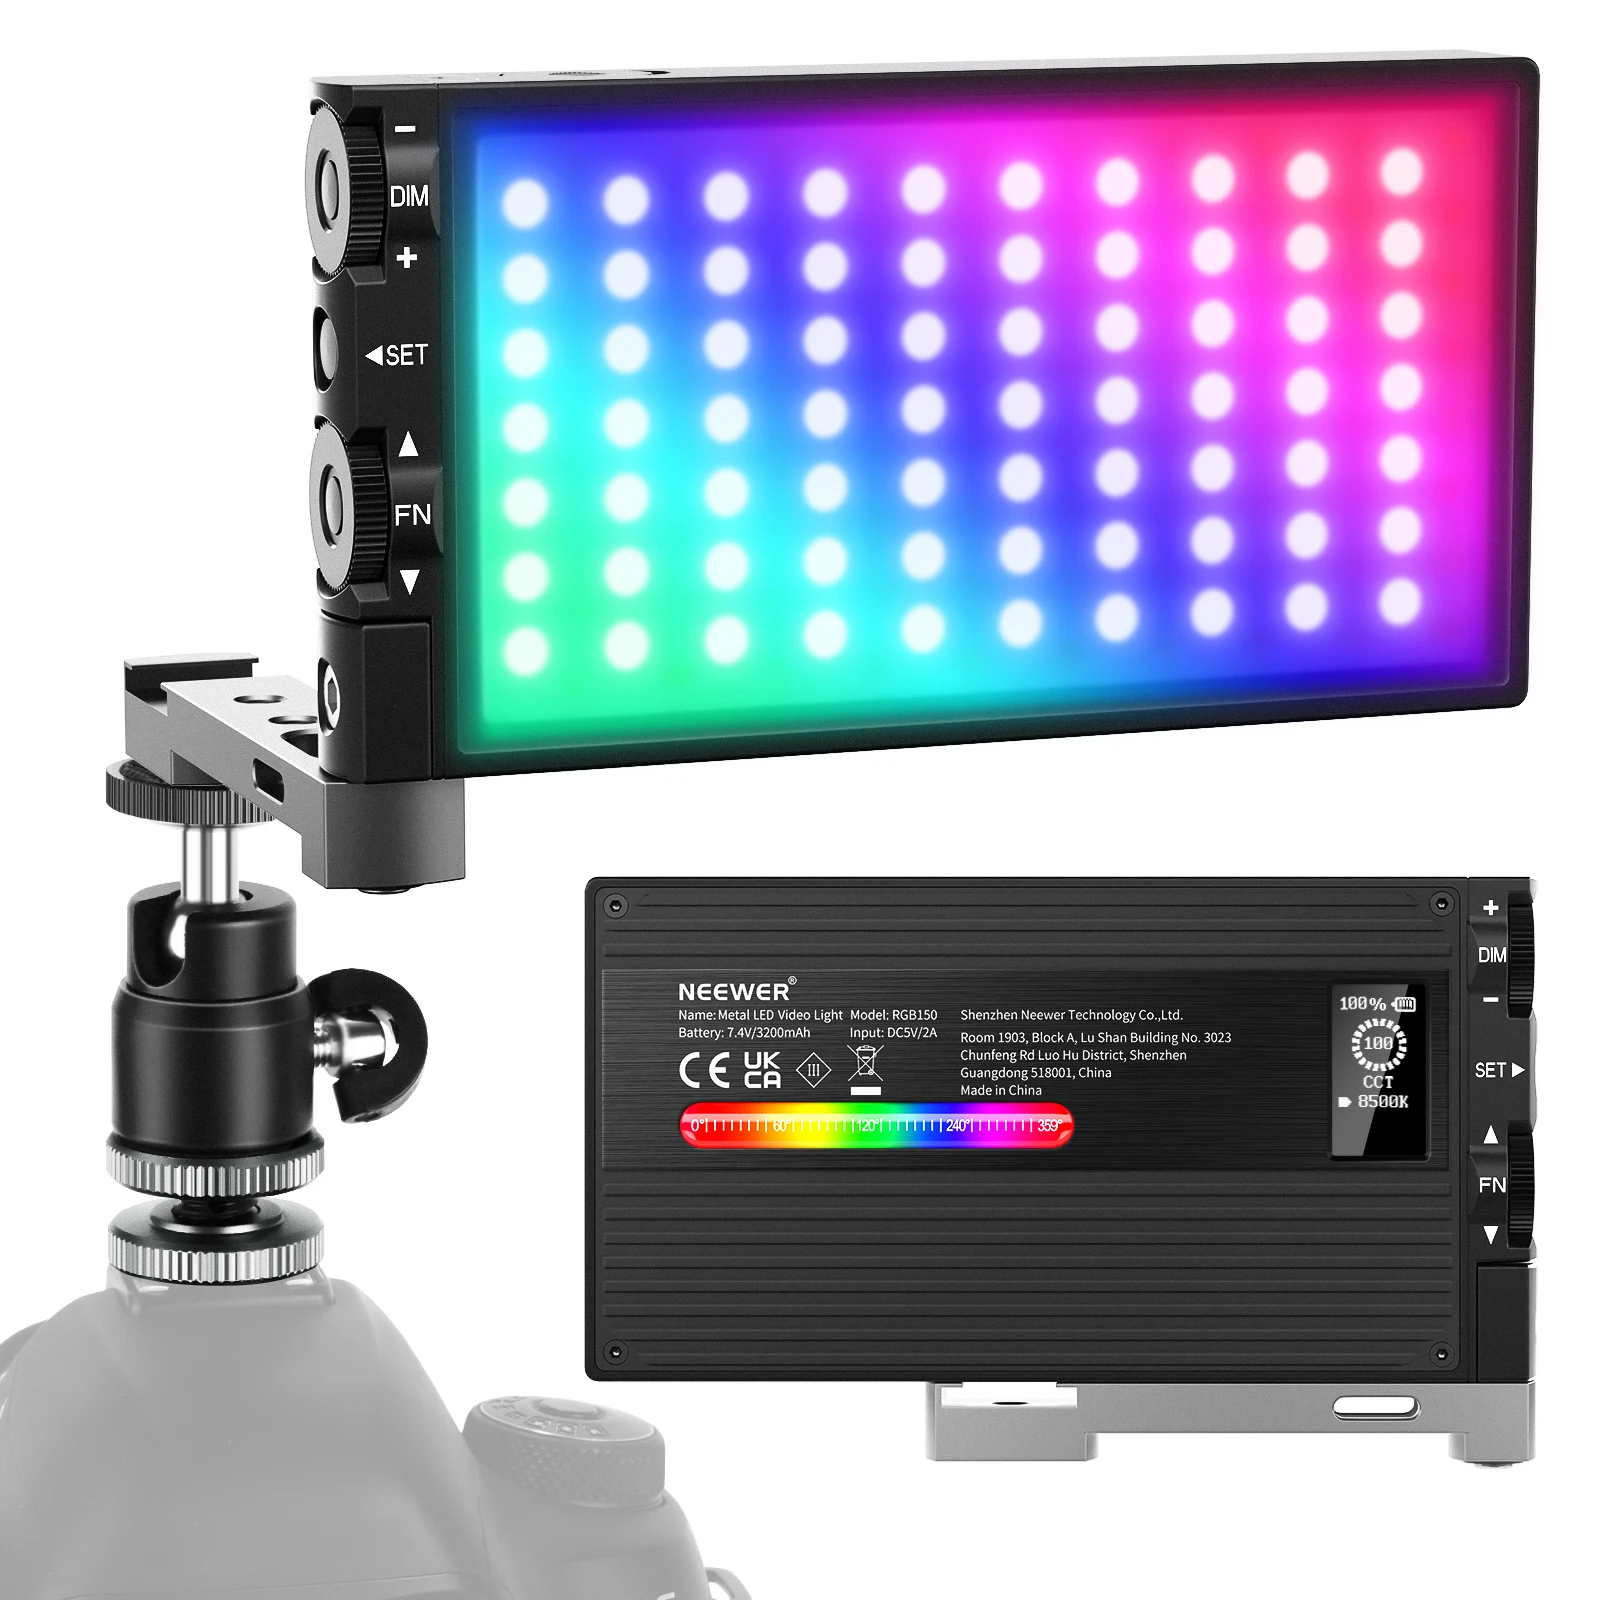 

Neewer LED Video Light, 12W RGB150 Full-Color Camera Light with Aluminum Alloy Body, CRI 97+, 2500~8500K, Rechargeable Battery